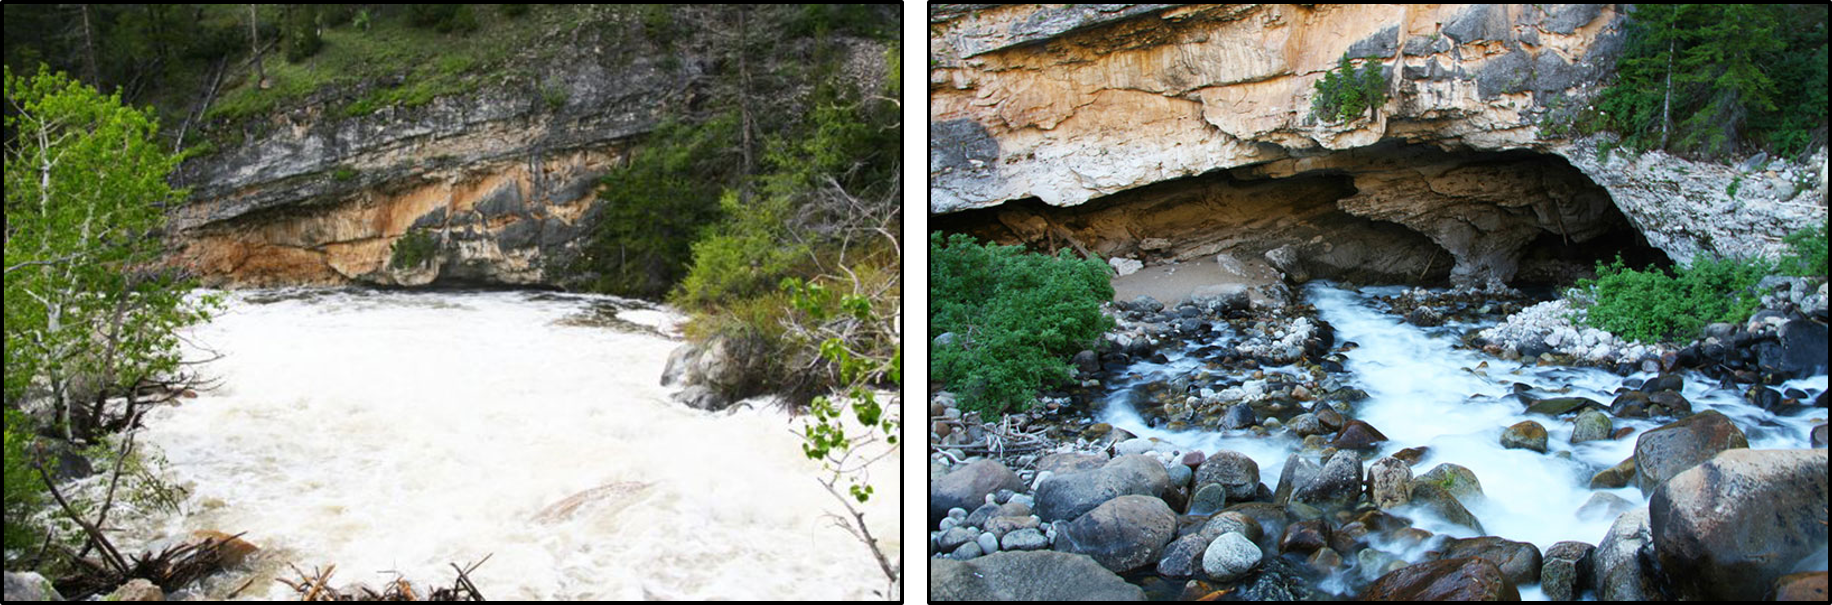 Pictures of Middle Popo Agie River Sinks at high water and normal water flow, Sinks Canyon, Wyoming